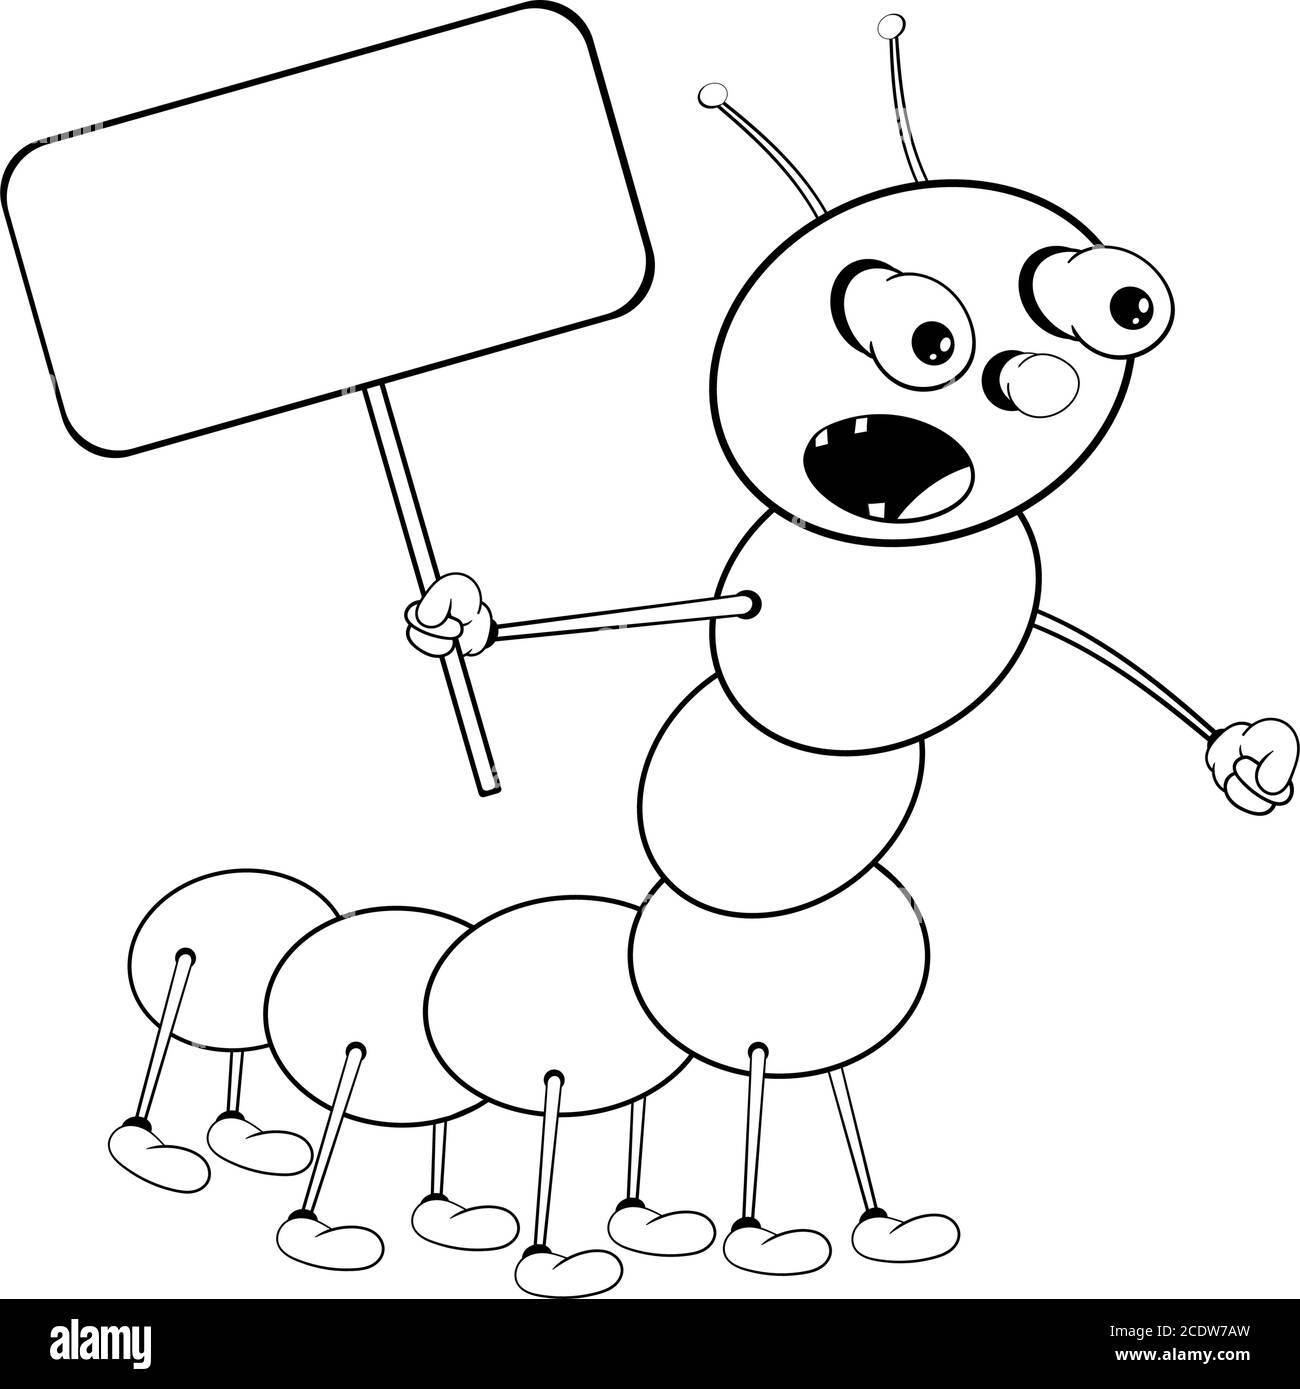 Funny cartoon caterpillar holds a rectangular tablet in his hand and shouts loudly. Black and white coloring. Stock Vector